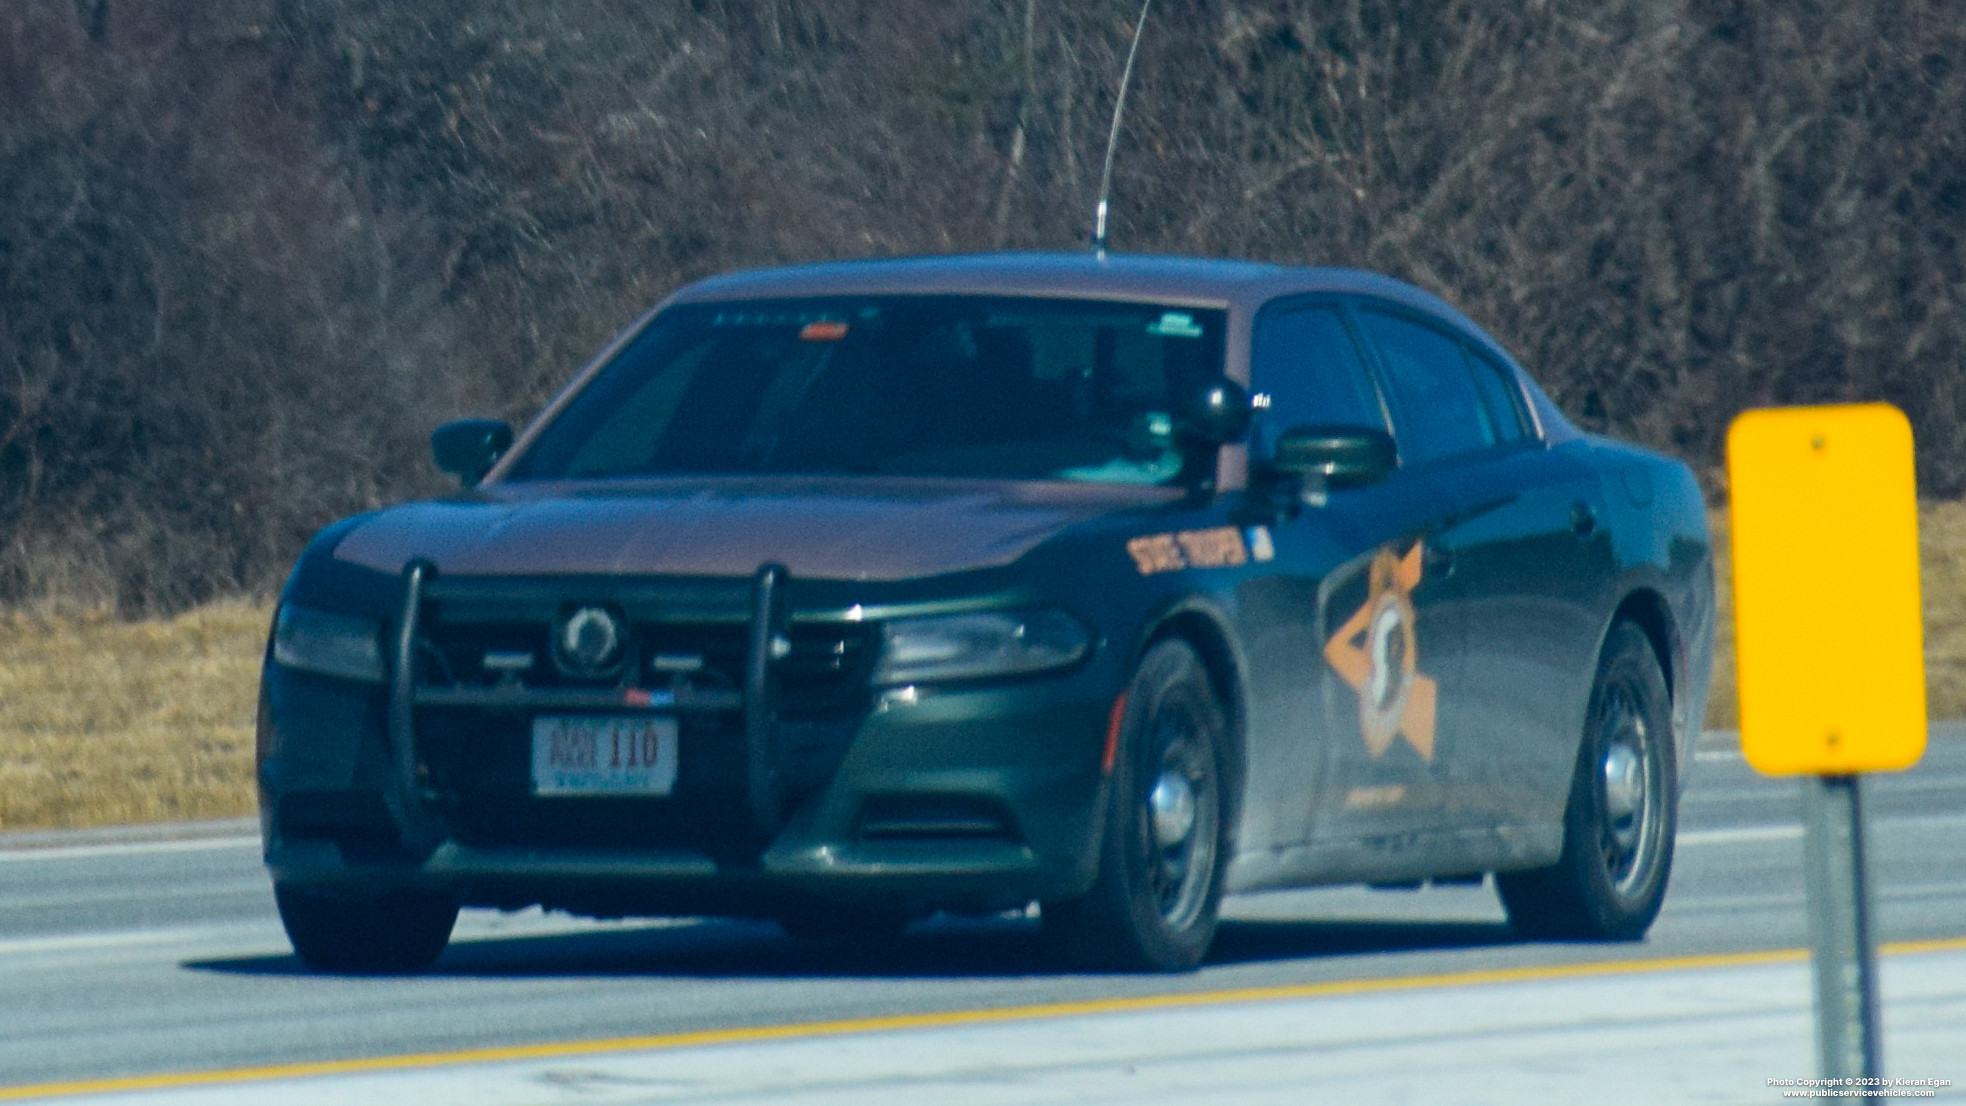 A photo  of New Hampshire State Police
            Cruiser 110, a 2015-2016 Dodge Charger             taken by Kieran Egan